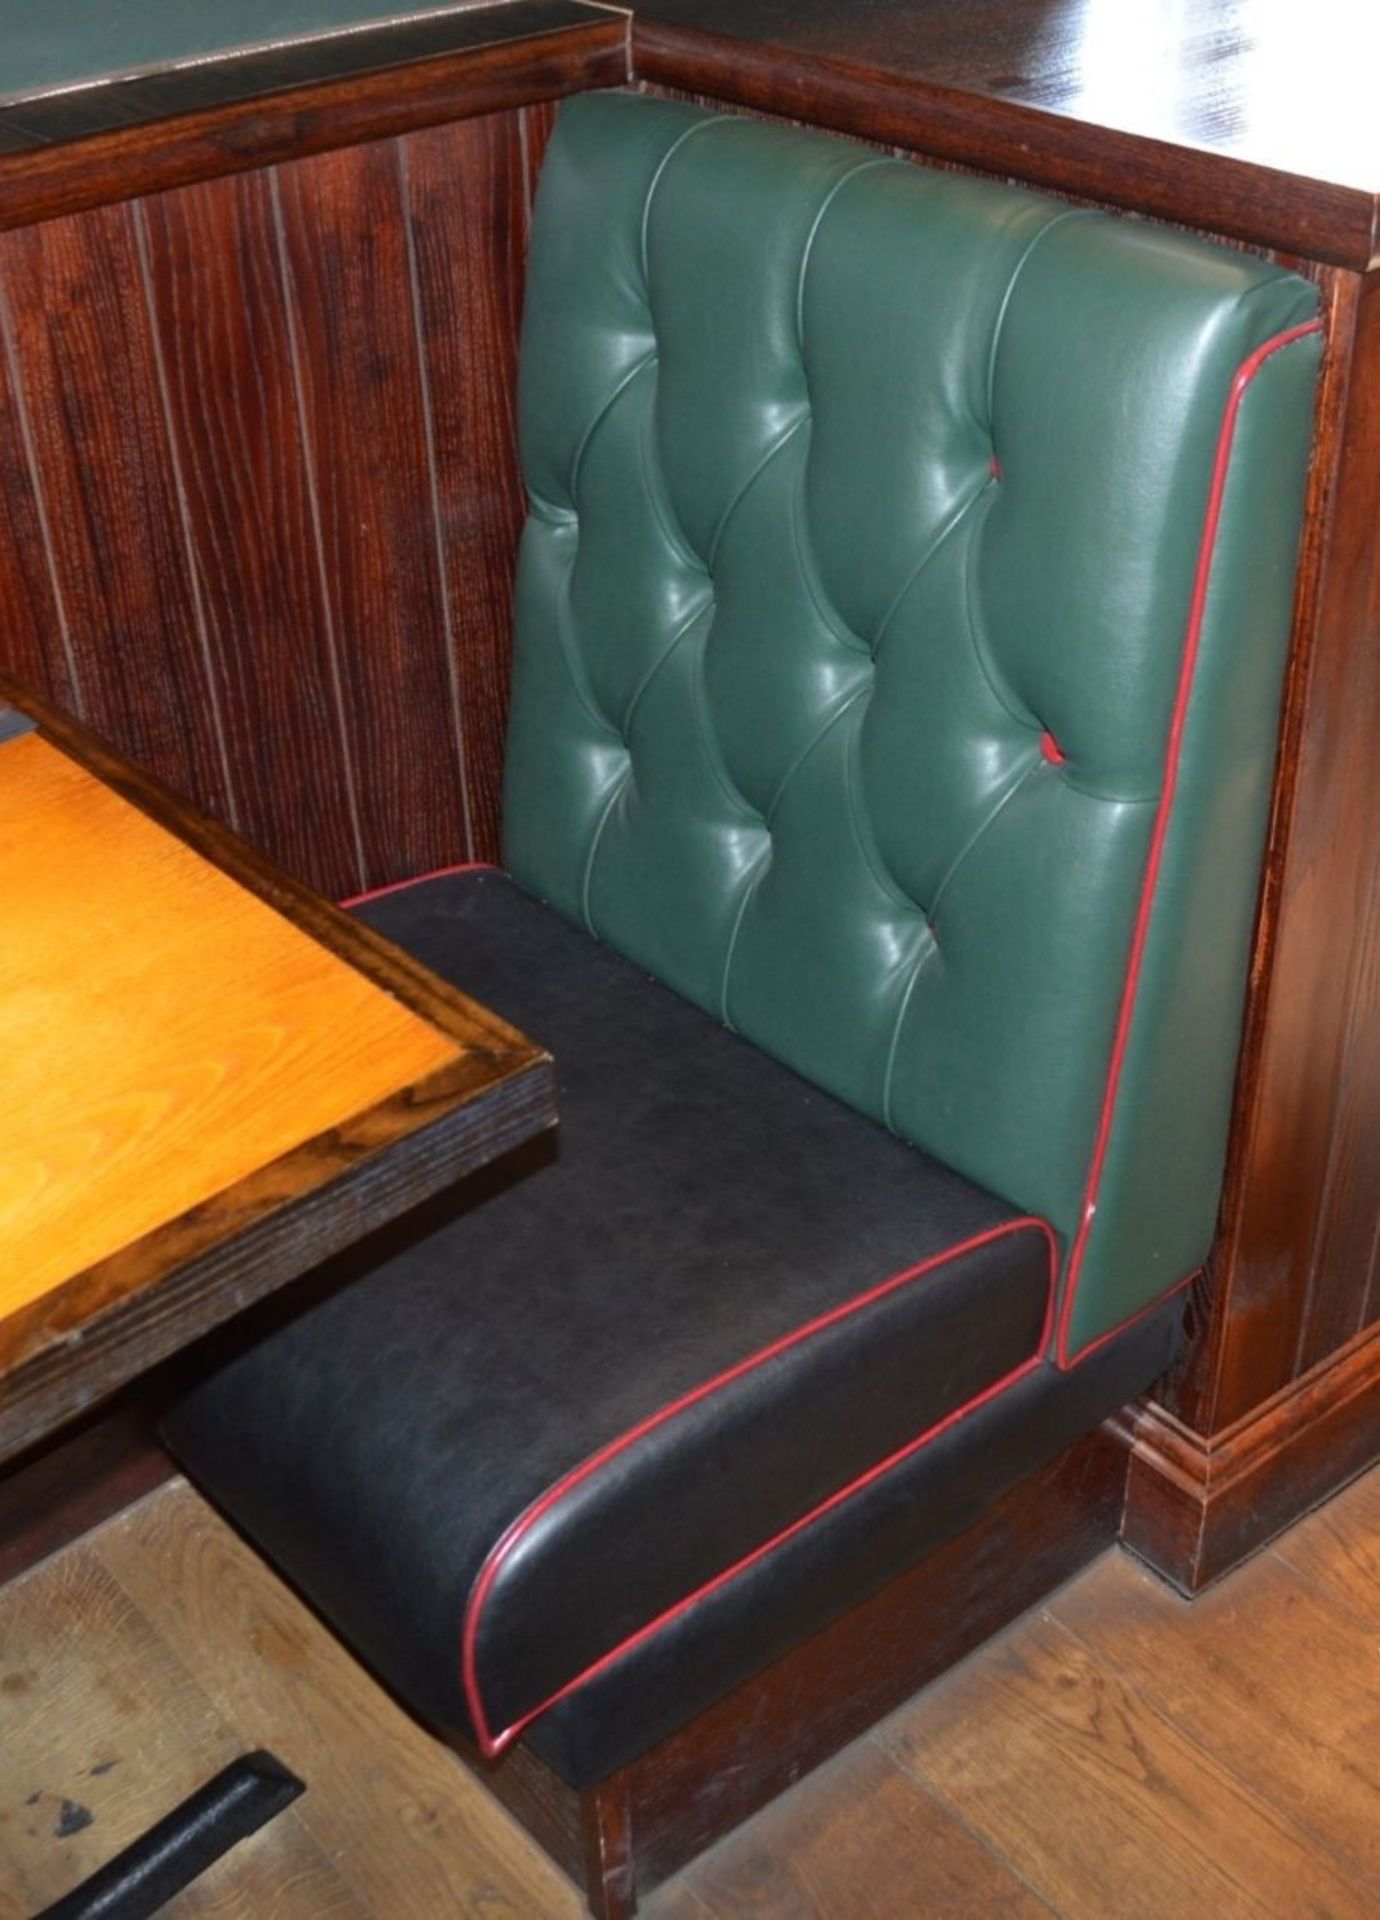 3 x Sections of Restaurant Single Seat Booth Seating With 2 x Tables - Image 8 of 9